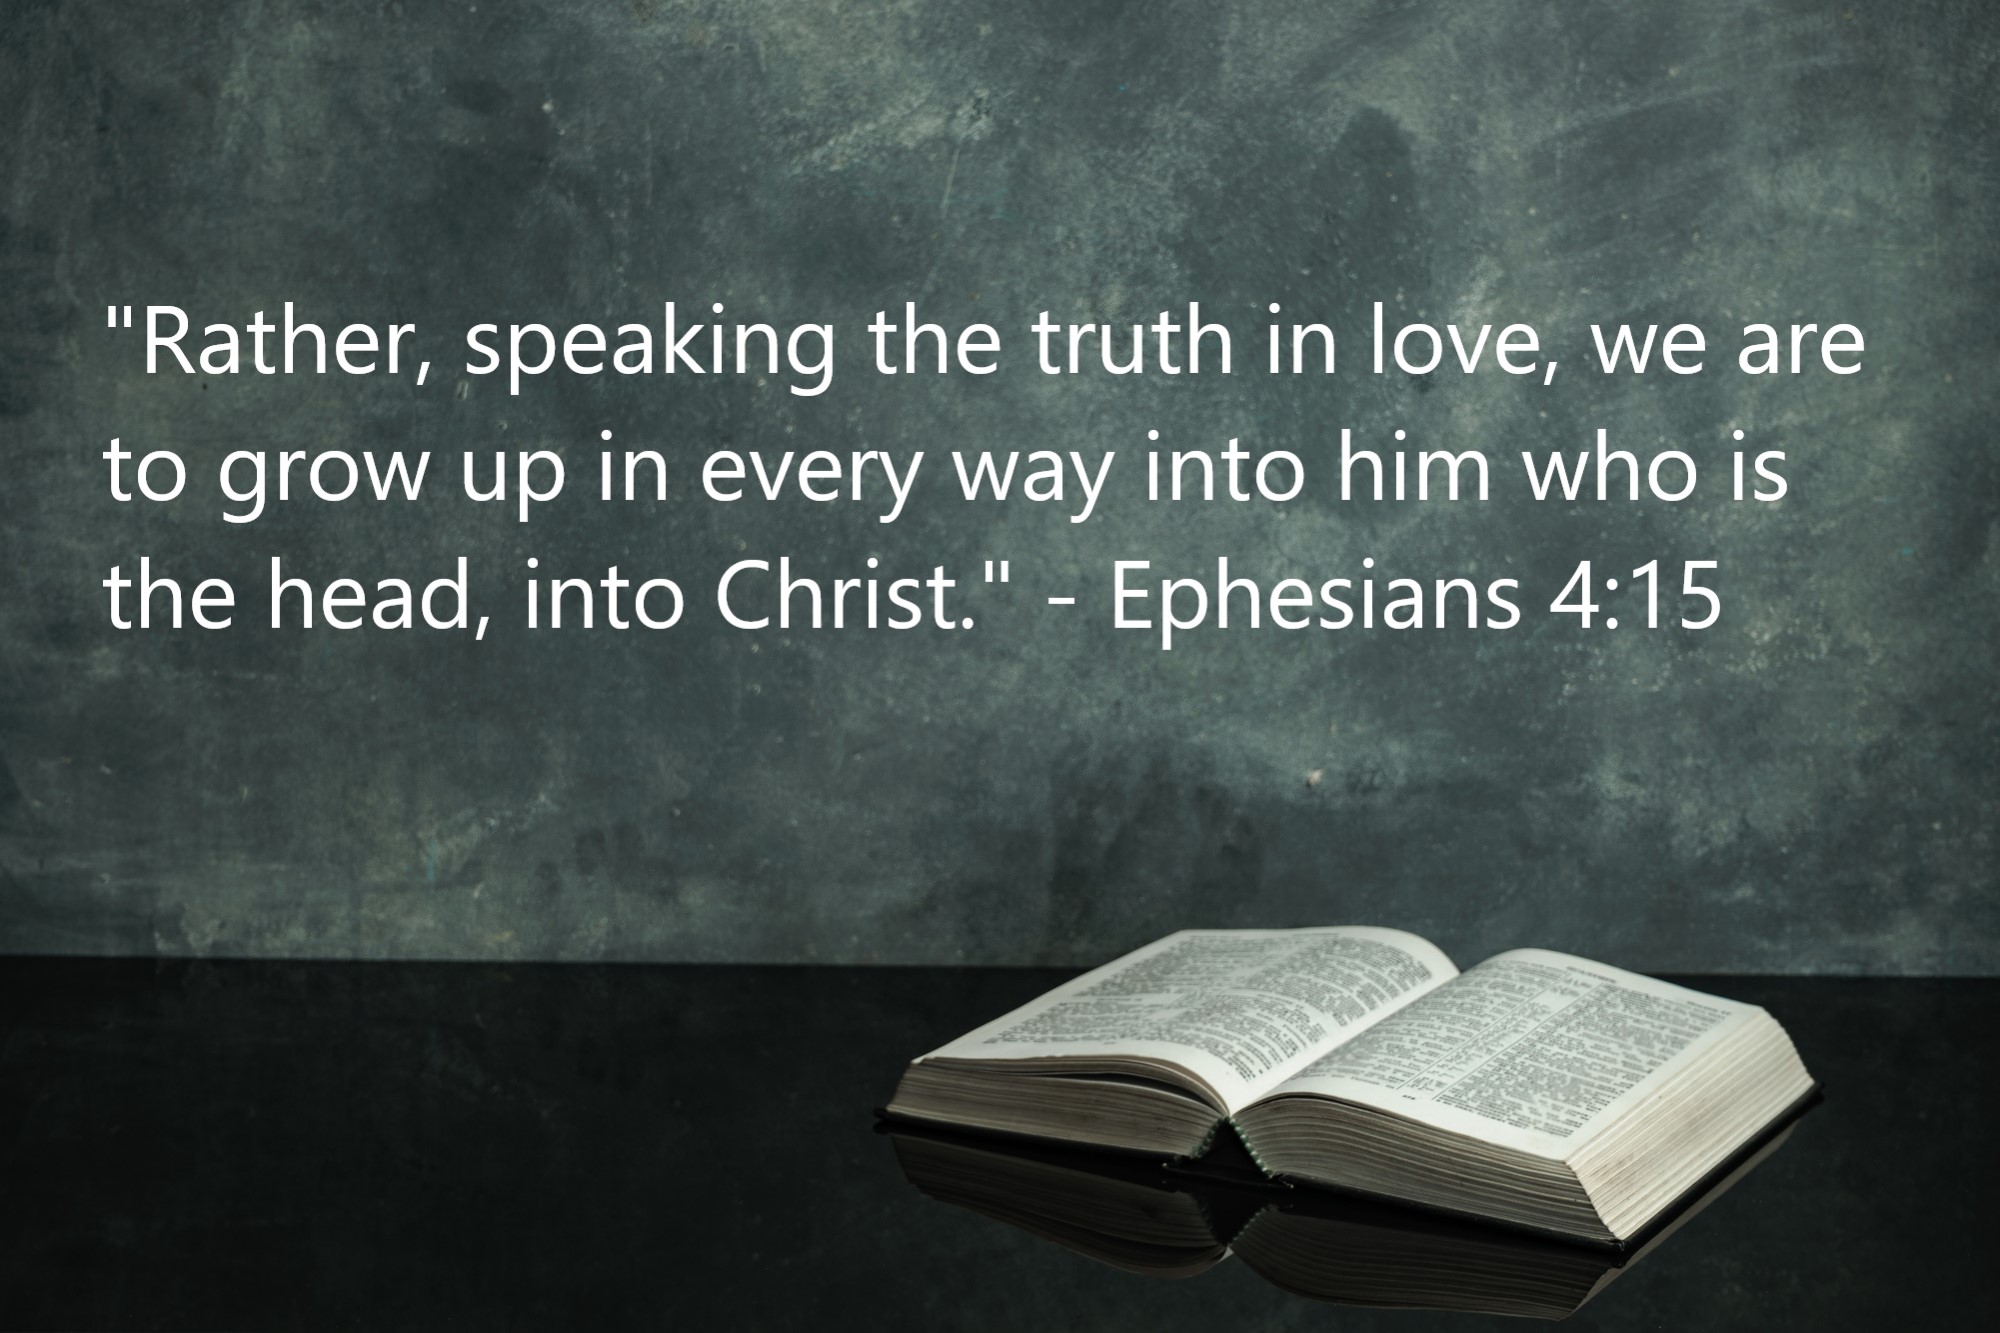 "Rather, speaking the truth in love, we are to grow up in every way into him who is the head, into Christ." - Ephesians 4:15